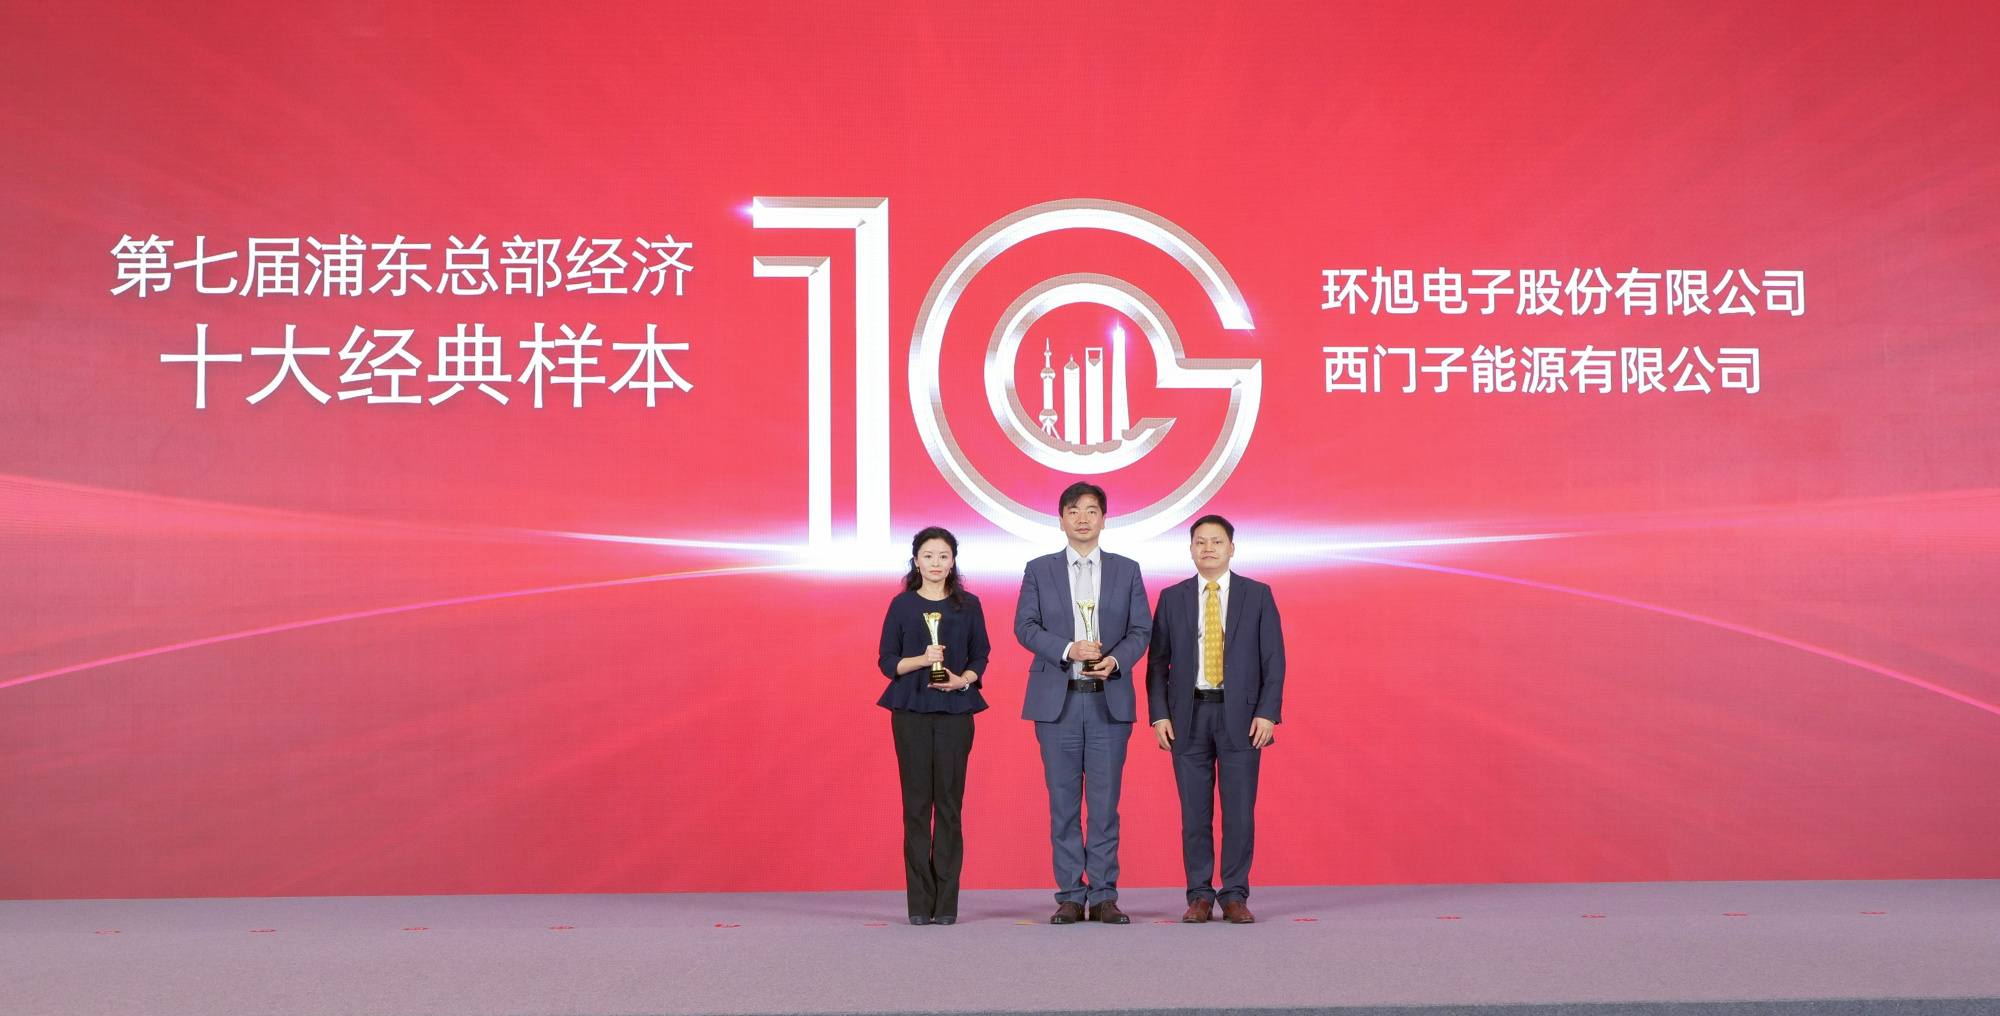 USI Entitled One of the “Top 10 Examples of Pudong Headquarters Economy”